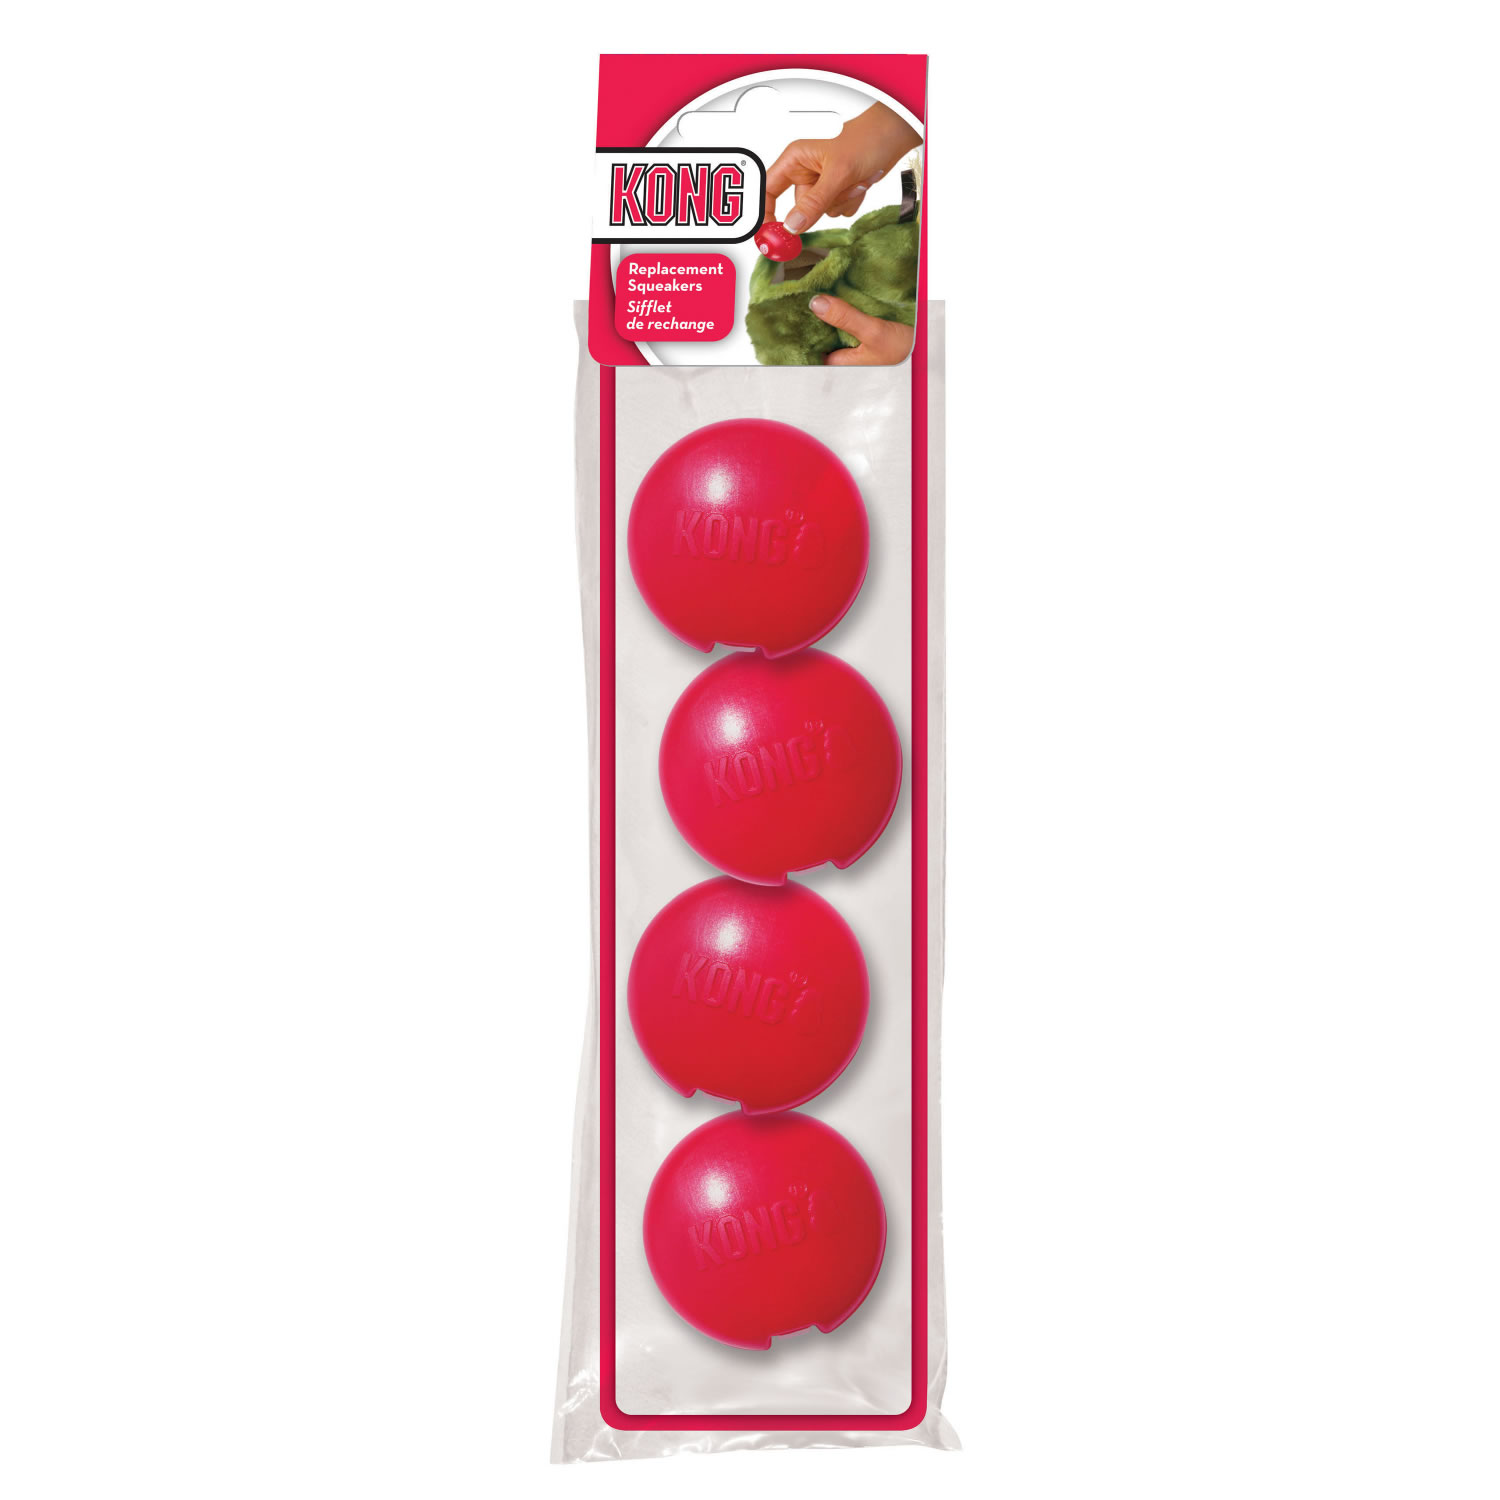 KONG DR NOYS SPARE SQUEAKERS LARGE  4 PACK